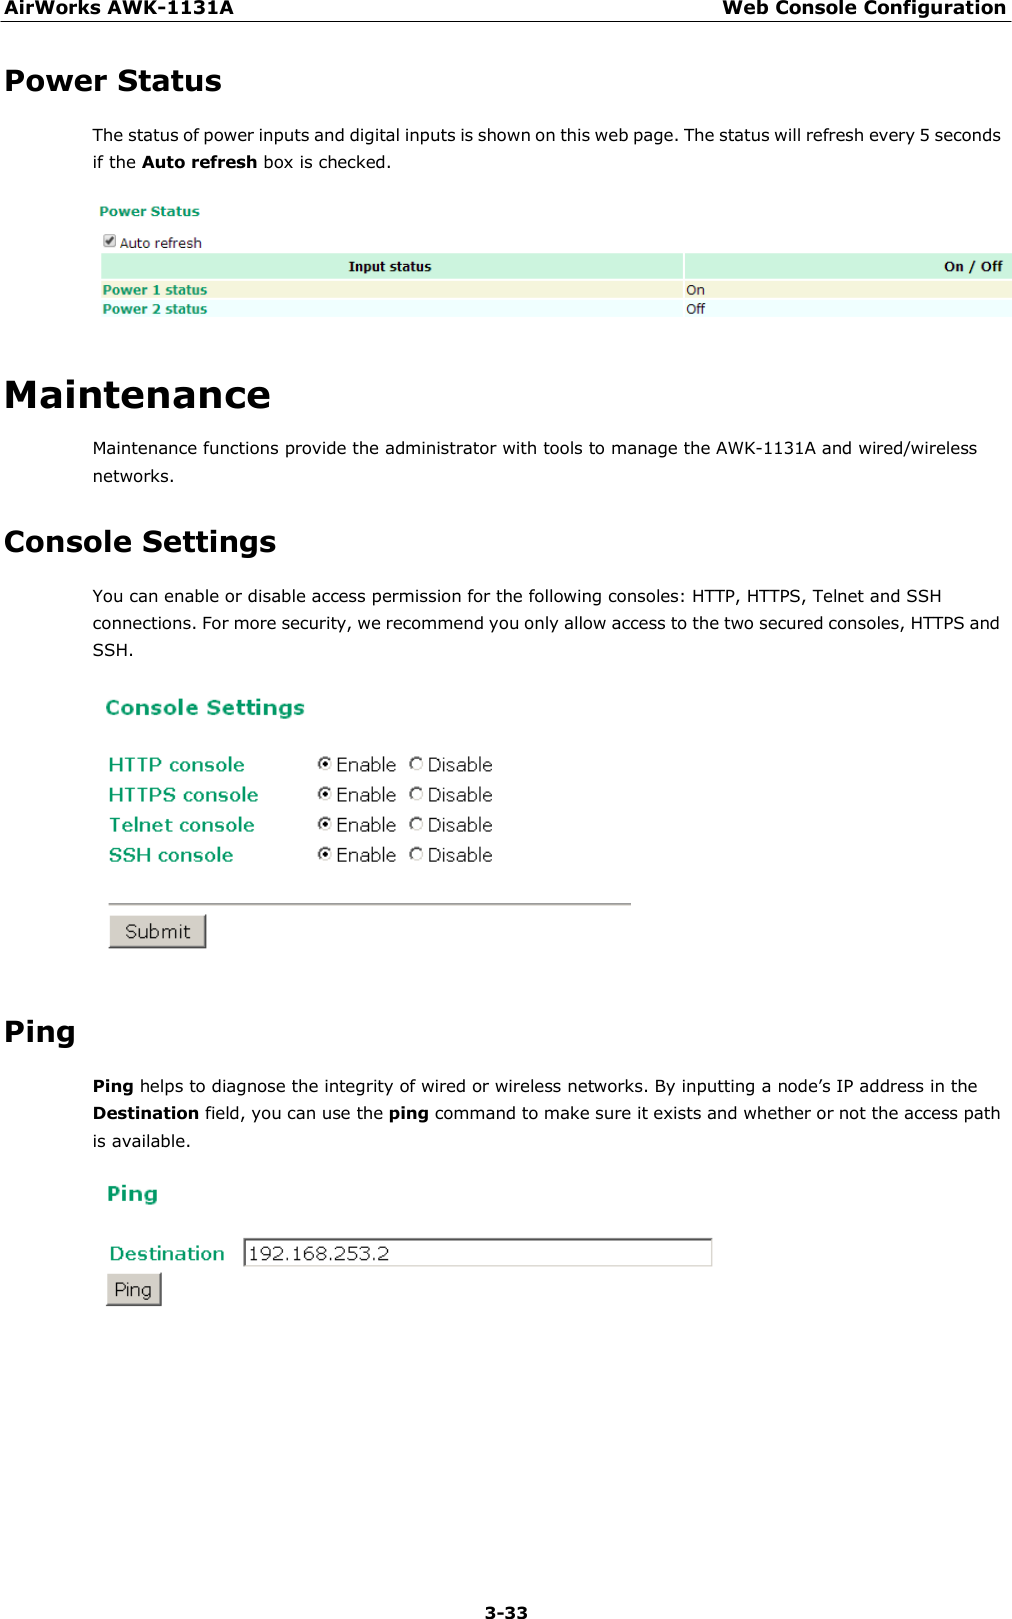 AirWorks AWK-1131A Web Console Configuration 3-33     Power Status  The status of power inputs and digital inputs is shown on this web page. The status will refresh every 5 seconds if the Auto refresh box is checked.     Maintenance  Maintenance functions provide the administrator with tools to manage the AWK-1131A and wired/wireless networks.  Console Settings  You can enable or disable access permission for the following consoles: HTTP, HTTPS, Telnet and SSH connections. For more security, we recommend you only allow access to the two secured consoles, HTTPS and SSH.     Ping  Ping helps to diagnose the integrity of wired or wireless networks. By inputting a node’s IP address in the Destination field, you can use the ping command to make sure it exists and whether or not the access path is available.   